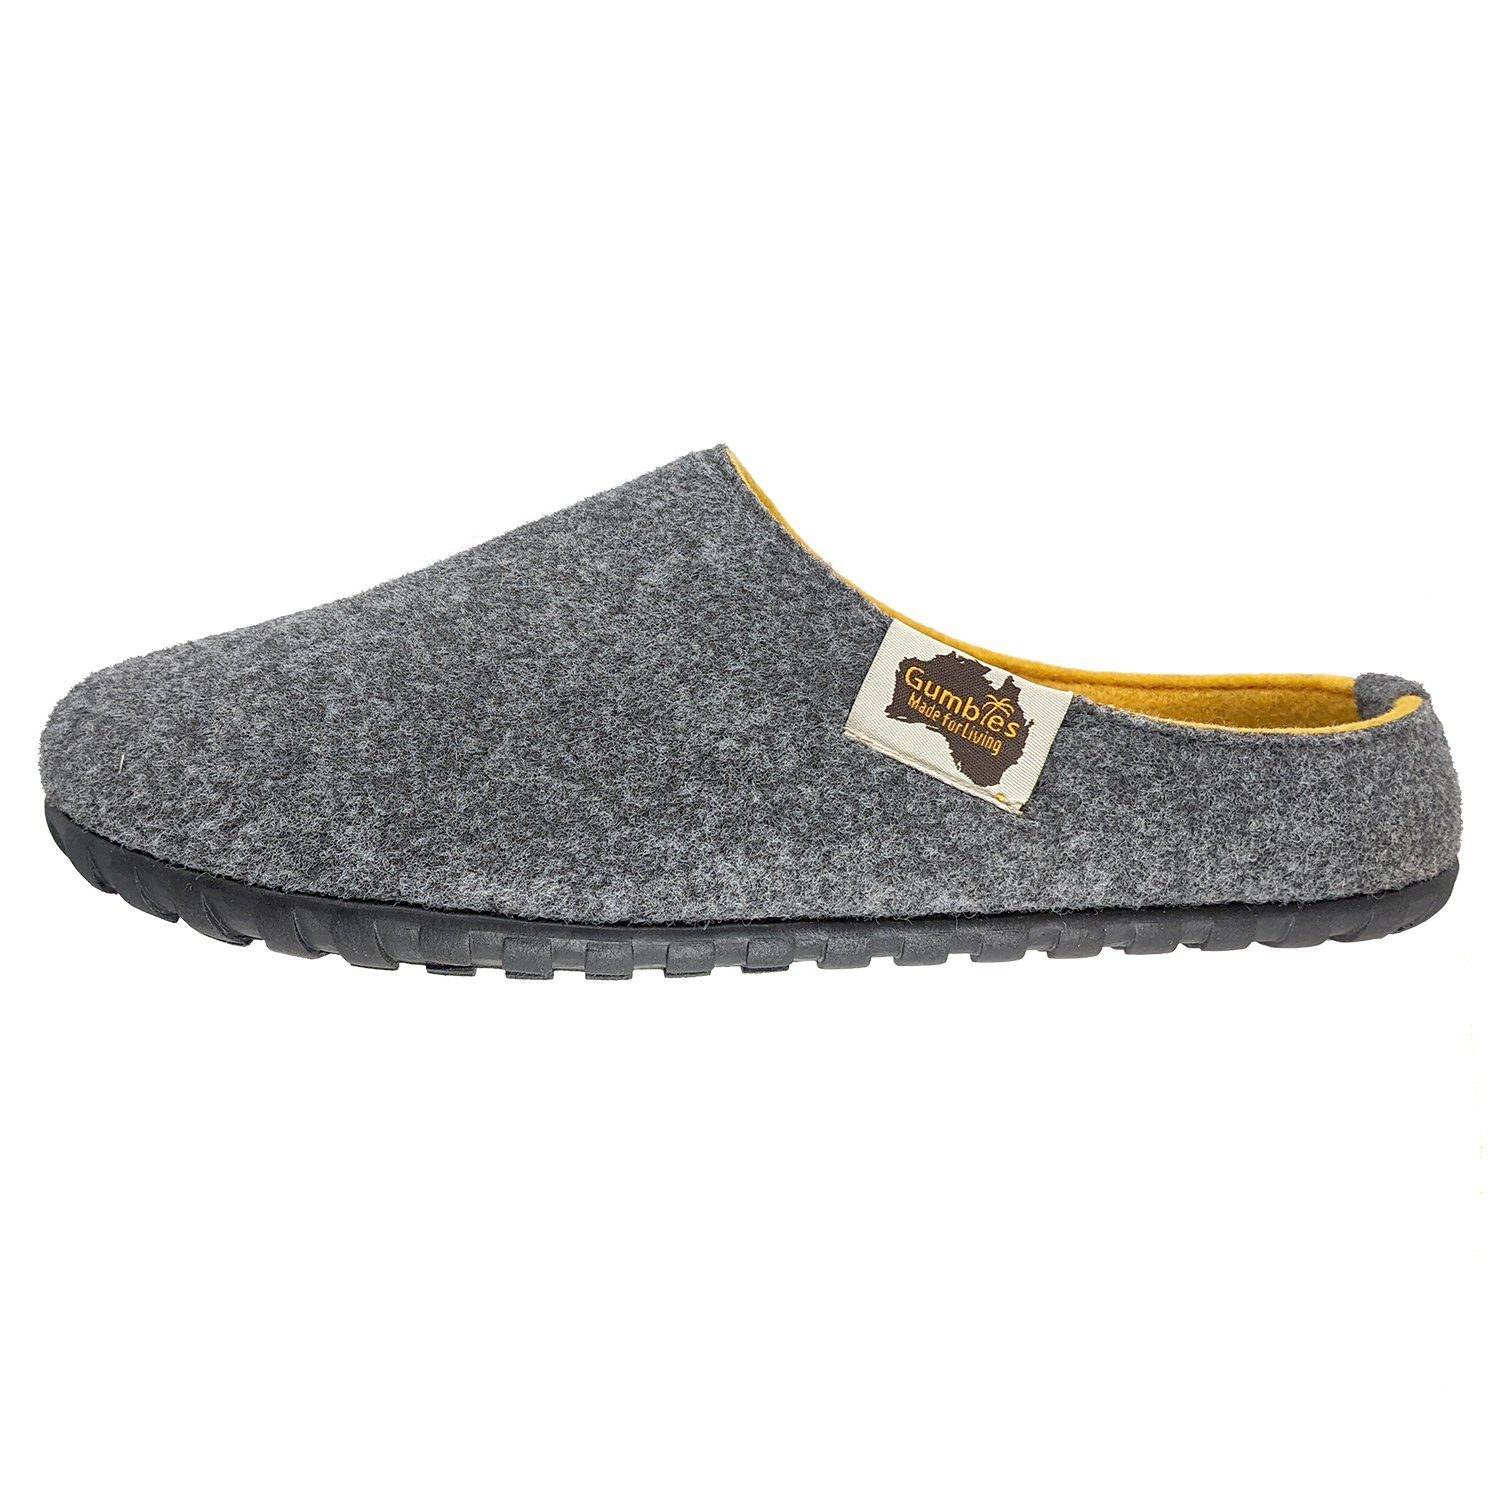 Gumbies Outback Slipper in Grey-Curry Materialien »in farbenfrohen Designs« Hausschuh recycelten aus